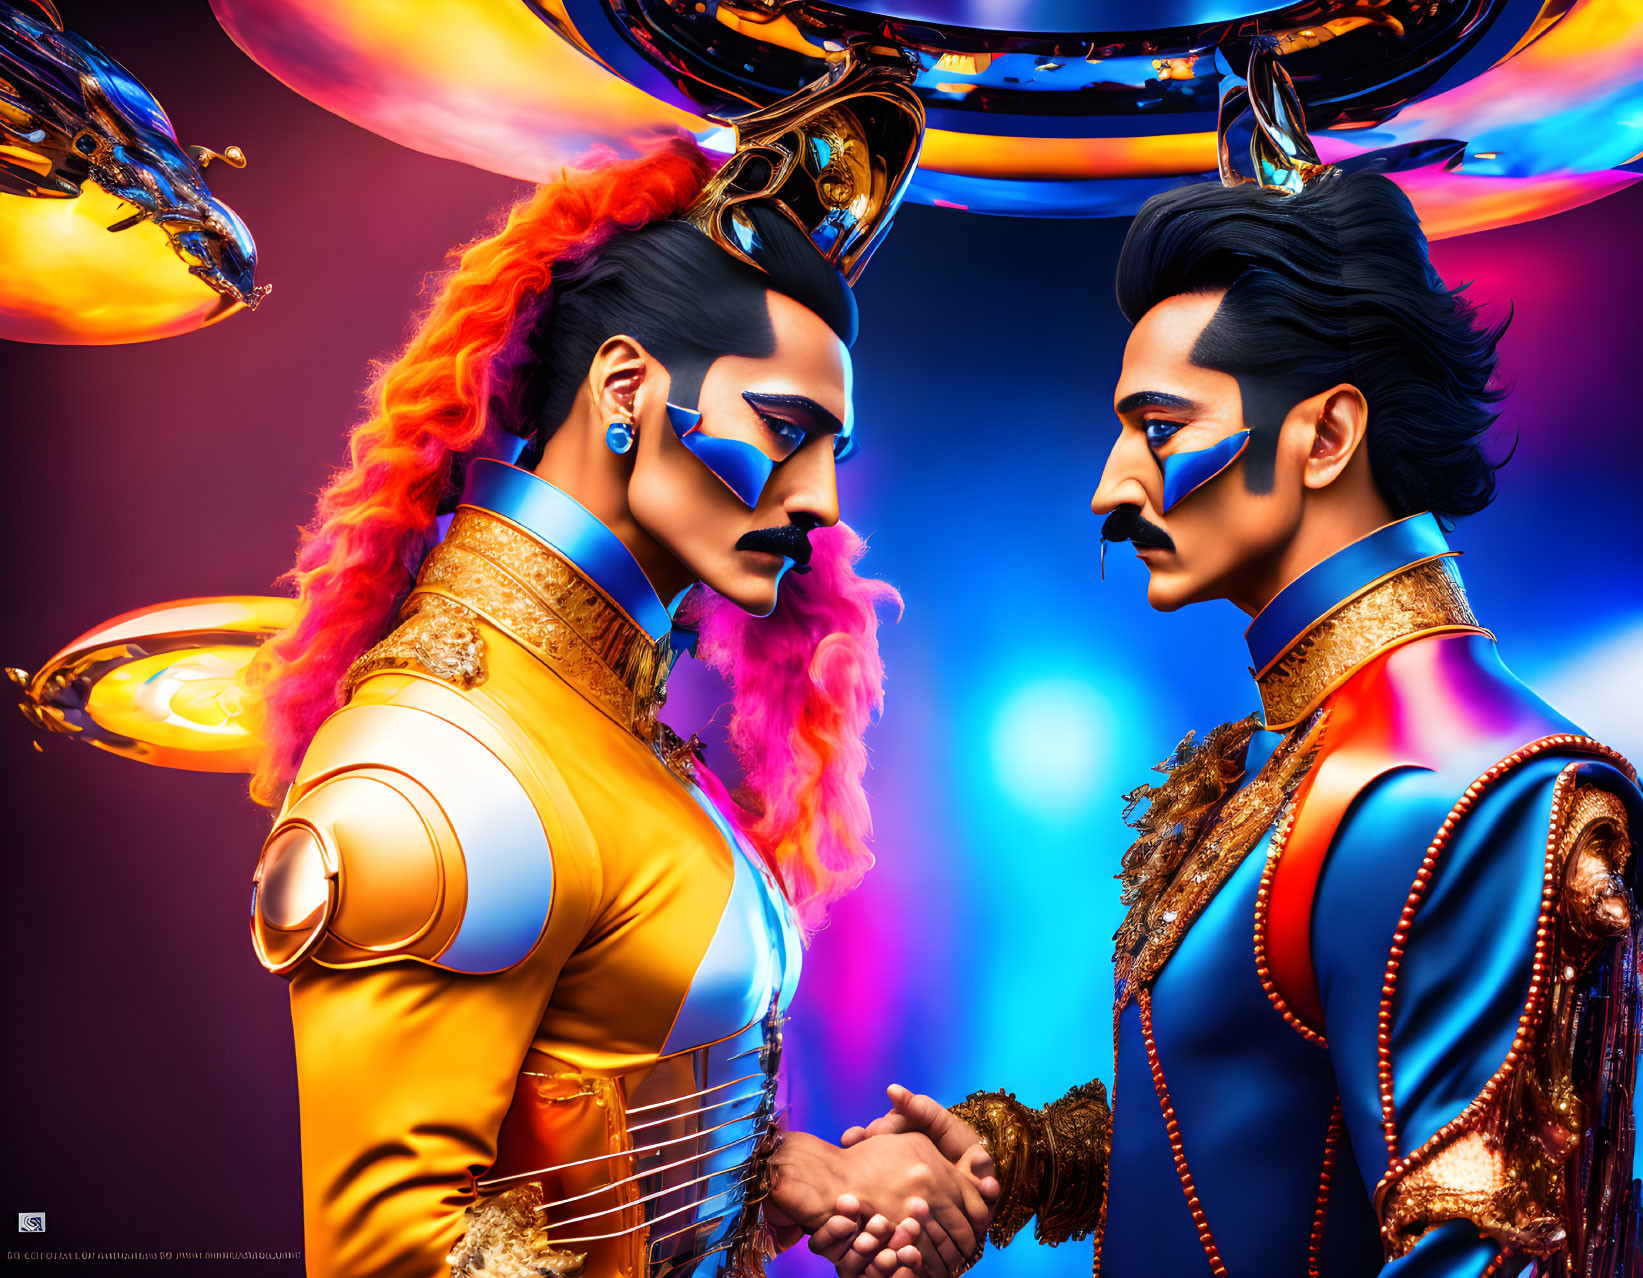 Two individuals in blue and gold costumes with futuristic makeup shaking hands.